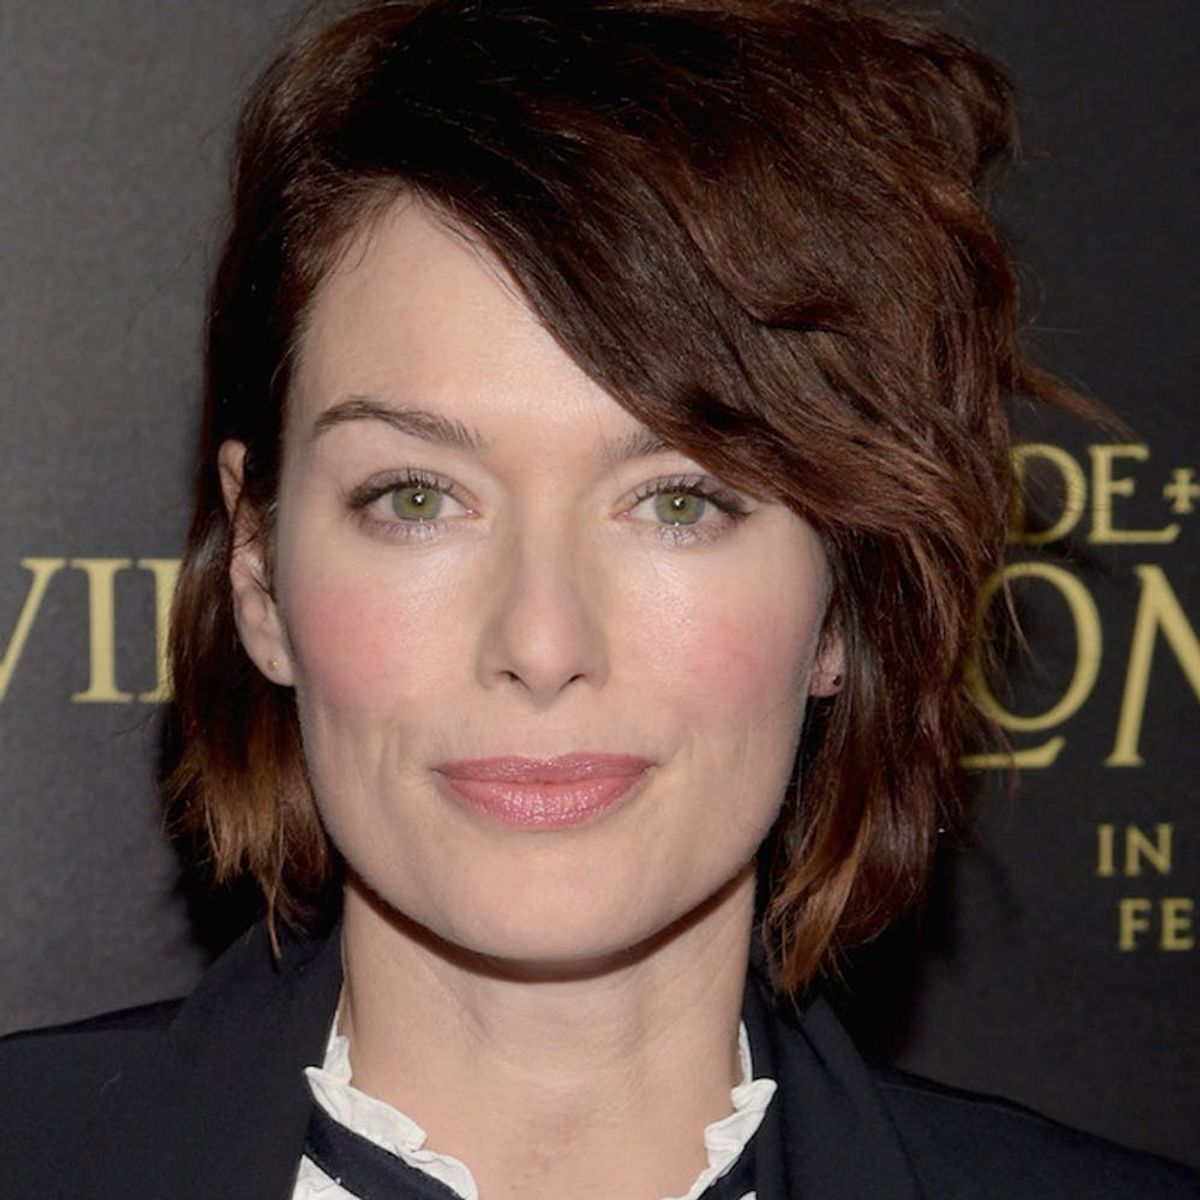 Get the Look of Lena Headey’s Ultra Cool Mid-Century Home